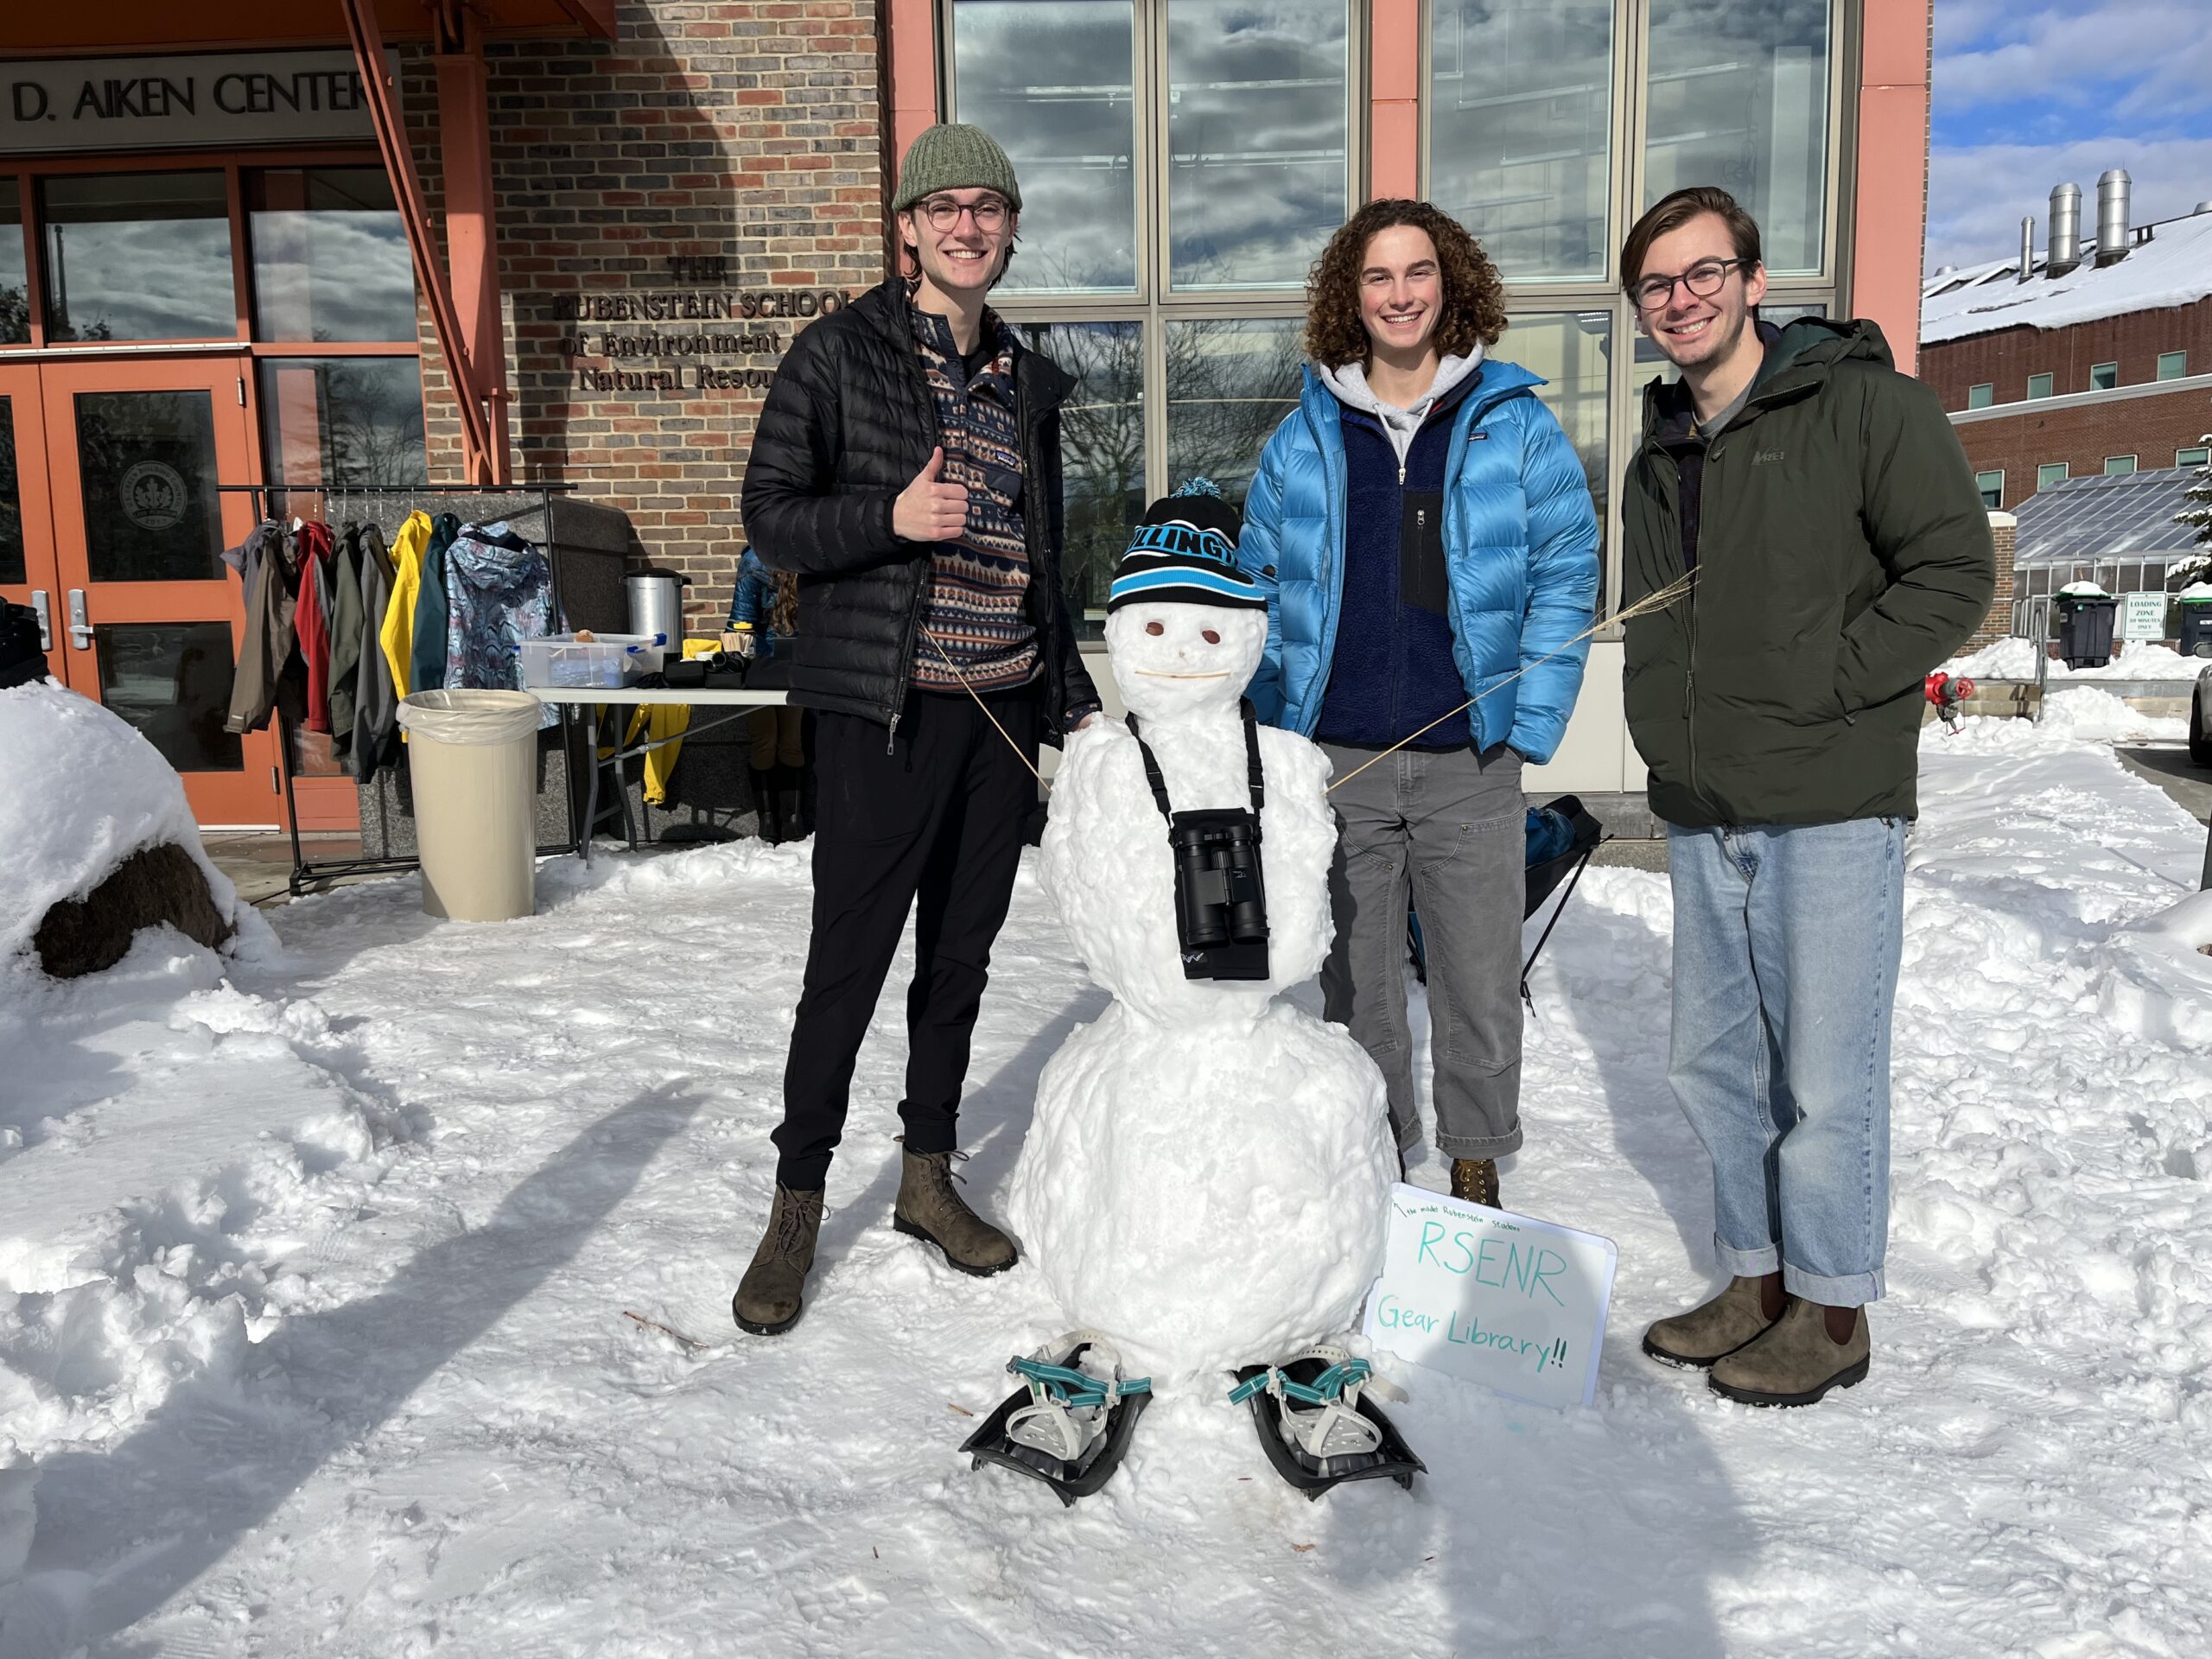 Students standing with a snow person wearing snowshoes and binoculars